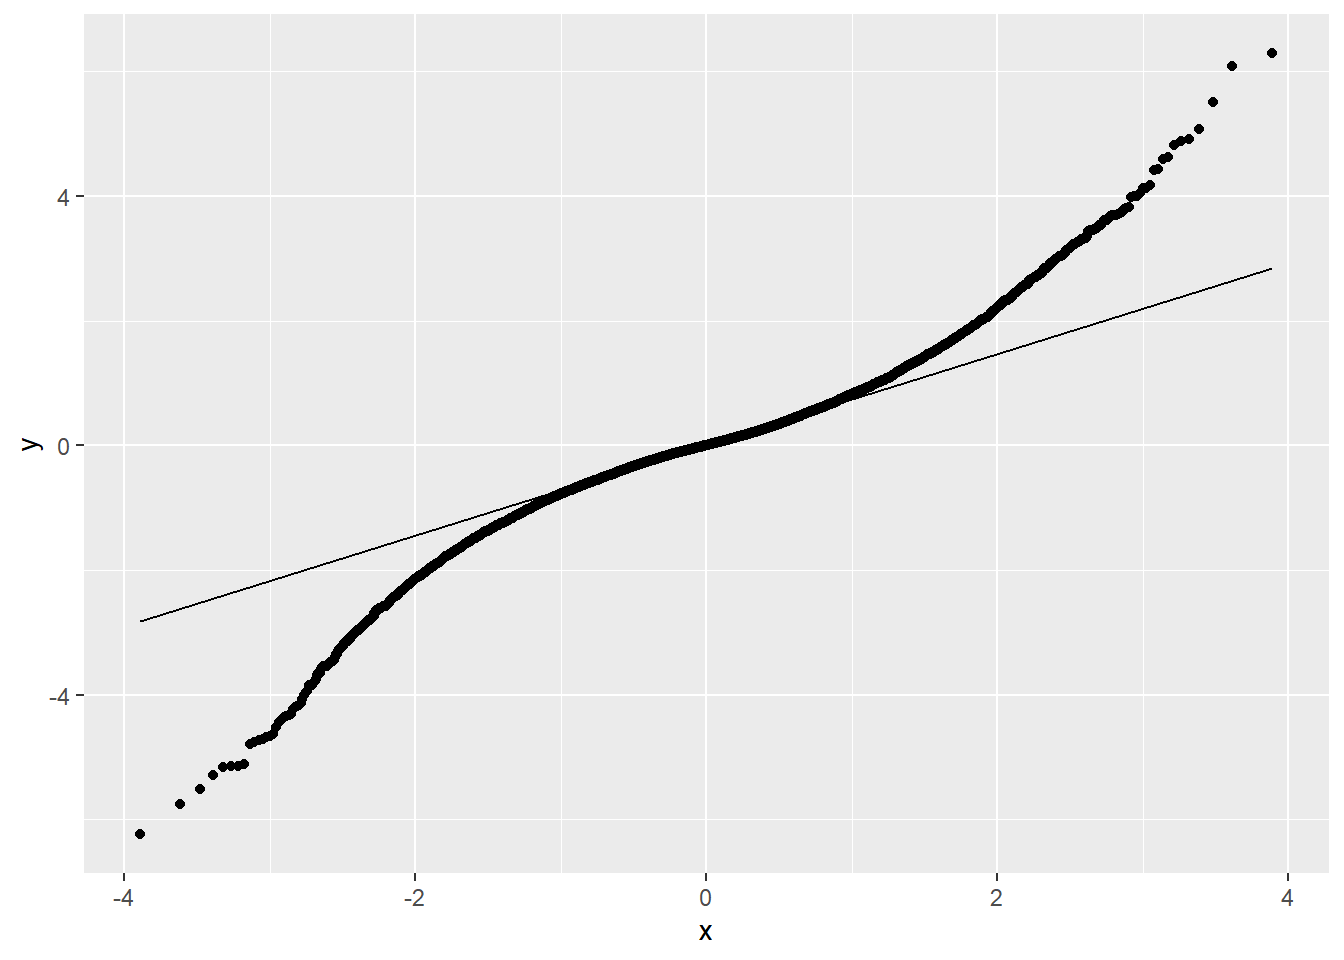 QQ-Plot: Quantiles of the Laplace distribution vs. quantiles of a theoretical normal distribution with same mean and standard deviation. Conclusion: Data is _not_ normally distributed (in fact it is leptokurtic), due to a problem with kurtosis.